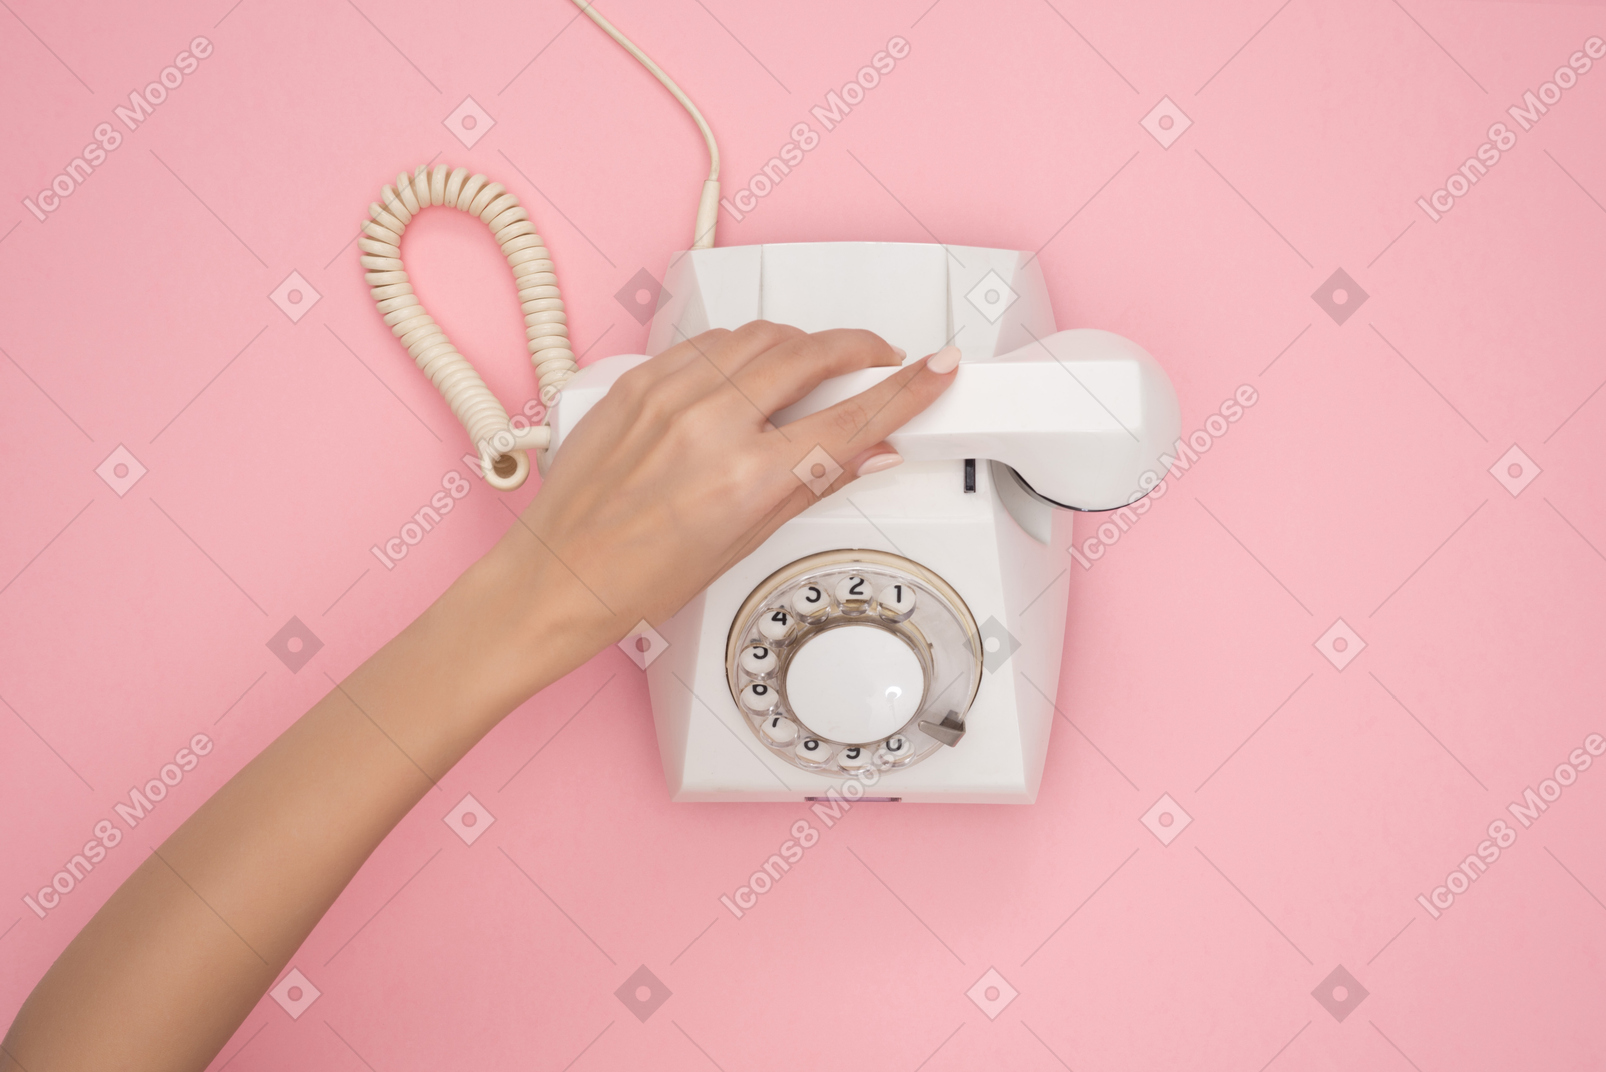 Female hand putting down phone receiver